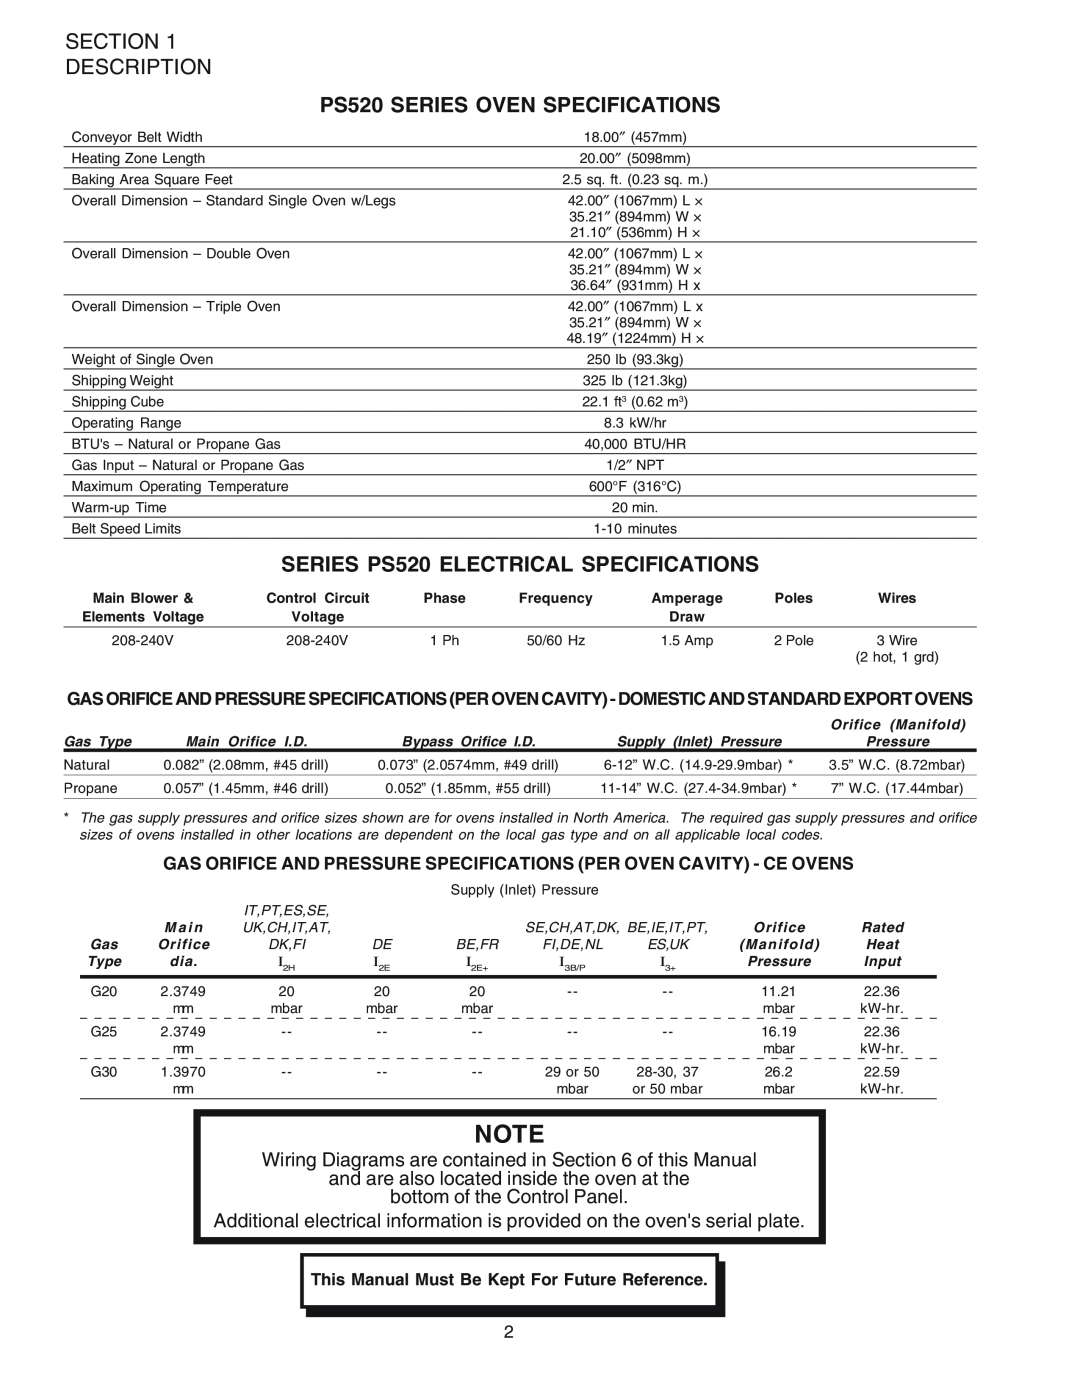 Middleby Marshall PS520G installation manual PS520 SERIES OVEN SPECIFICATIONS, SERIES PS520 ELECTRICAL SPECIFICATIONS 